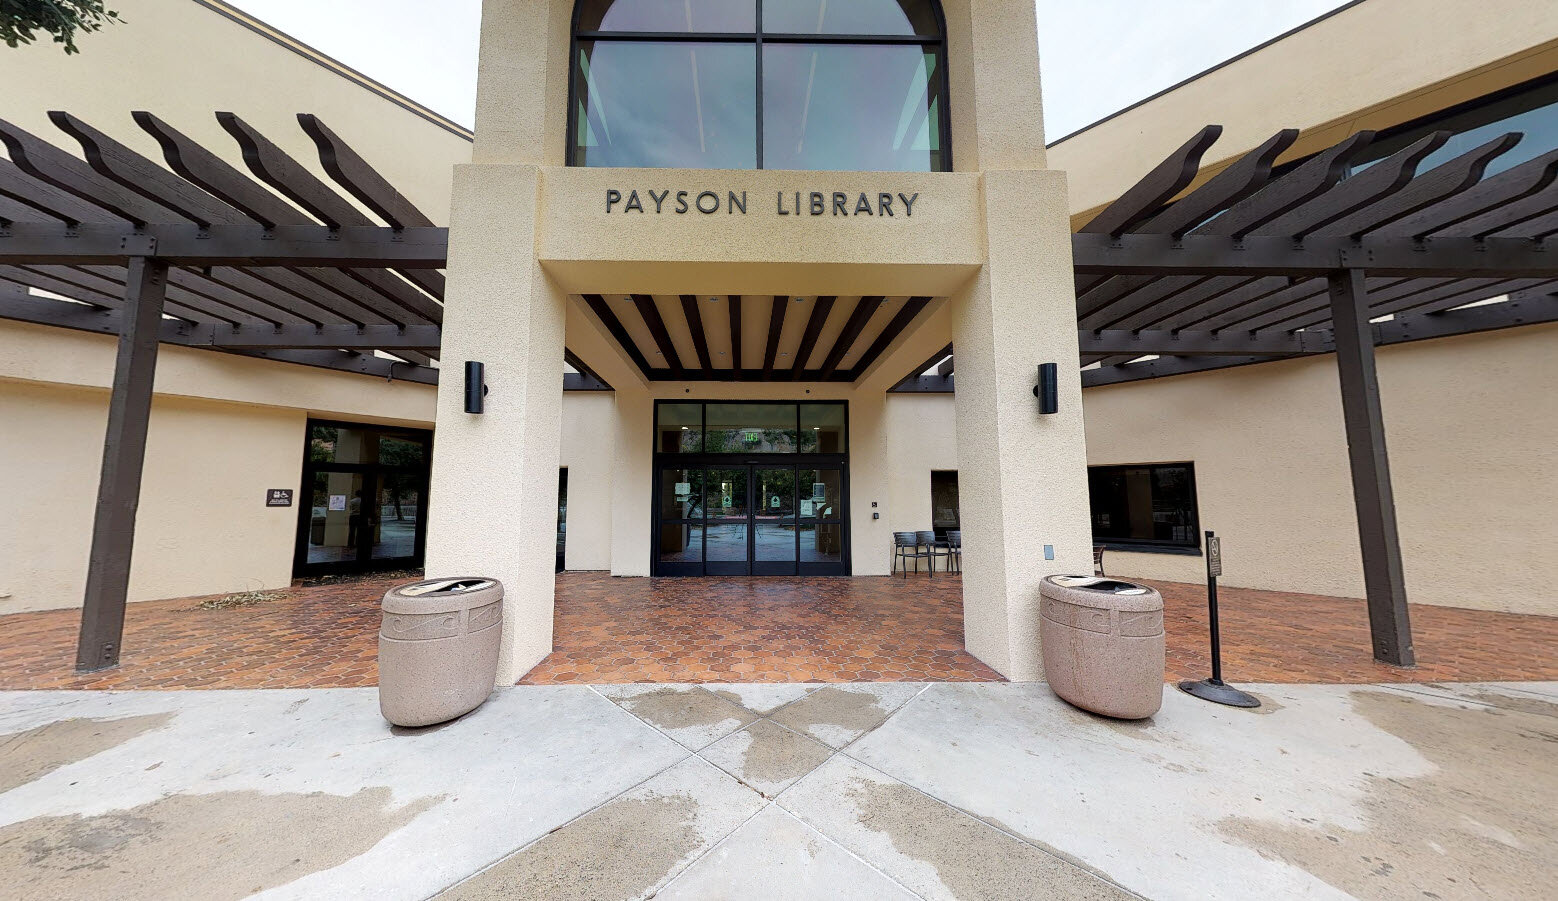 Payson Library, CA